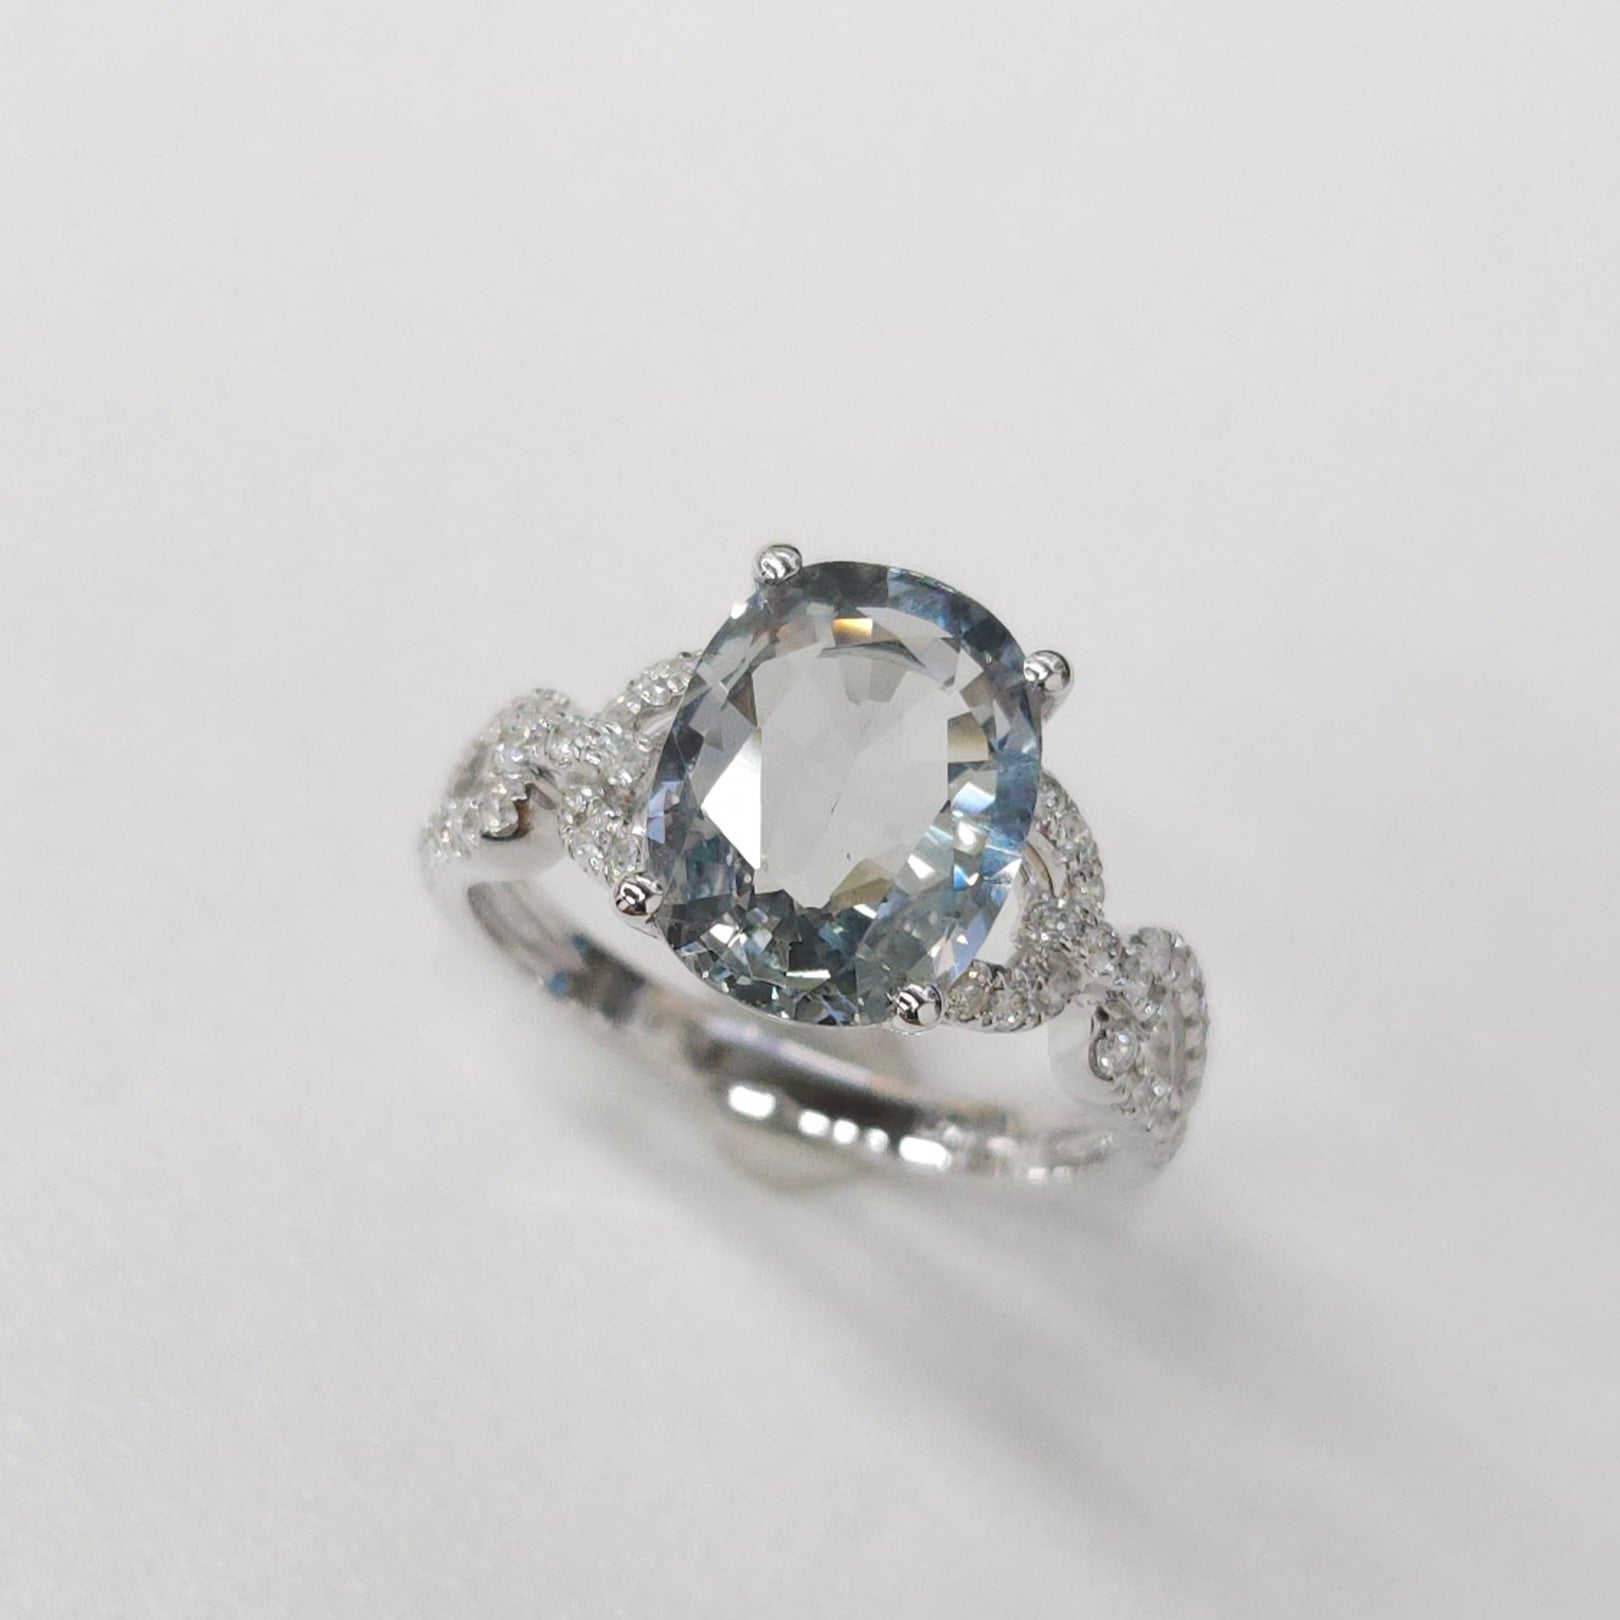 Crafted in 18K white gold, this extraordinary piece showcases a captivating  Light Green Sapphire  of exceptional quality and beauty.  It is complemented by 0.32 carats of round brilliant-cut diamonds set around the ring adding sparkle and light to